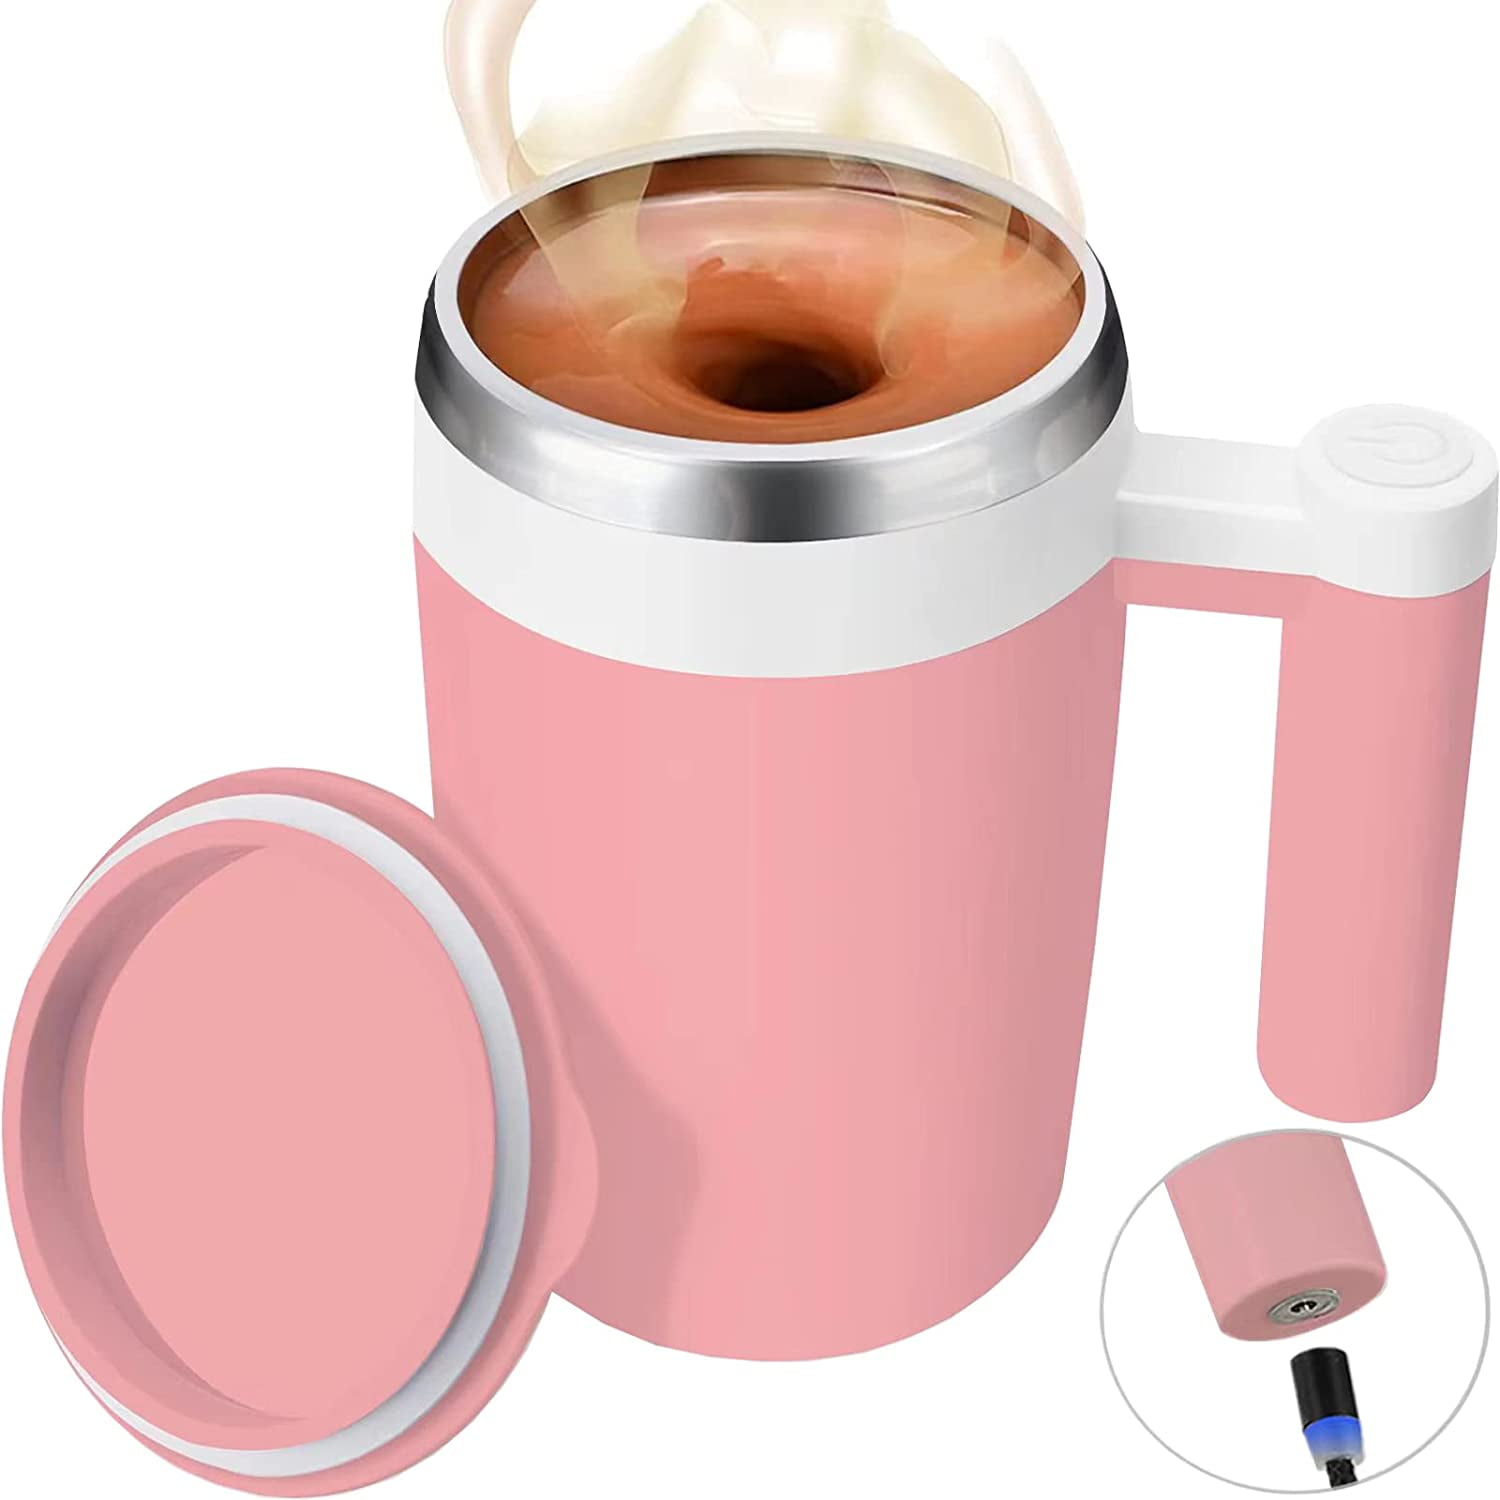  FCSWEET Self Stirring Mug,Rechargeable Auto Magnetic Coffee Mug  with 2Pc Stir Bar,Waterproof Automatic Mixing Cup for Milk/Cocoa at  Office/Kitchen/Travel 14oz Best Gift - Pink : Home & Kitchen